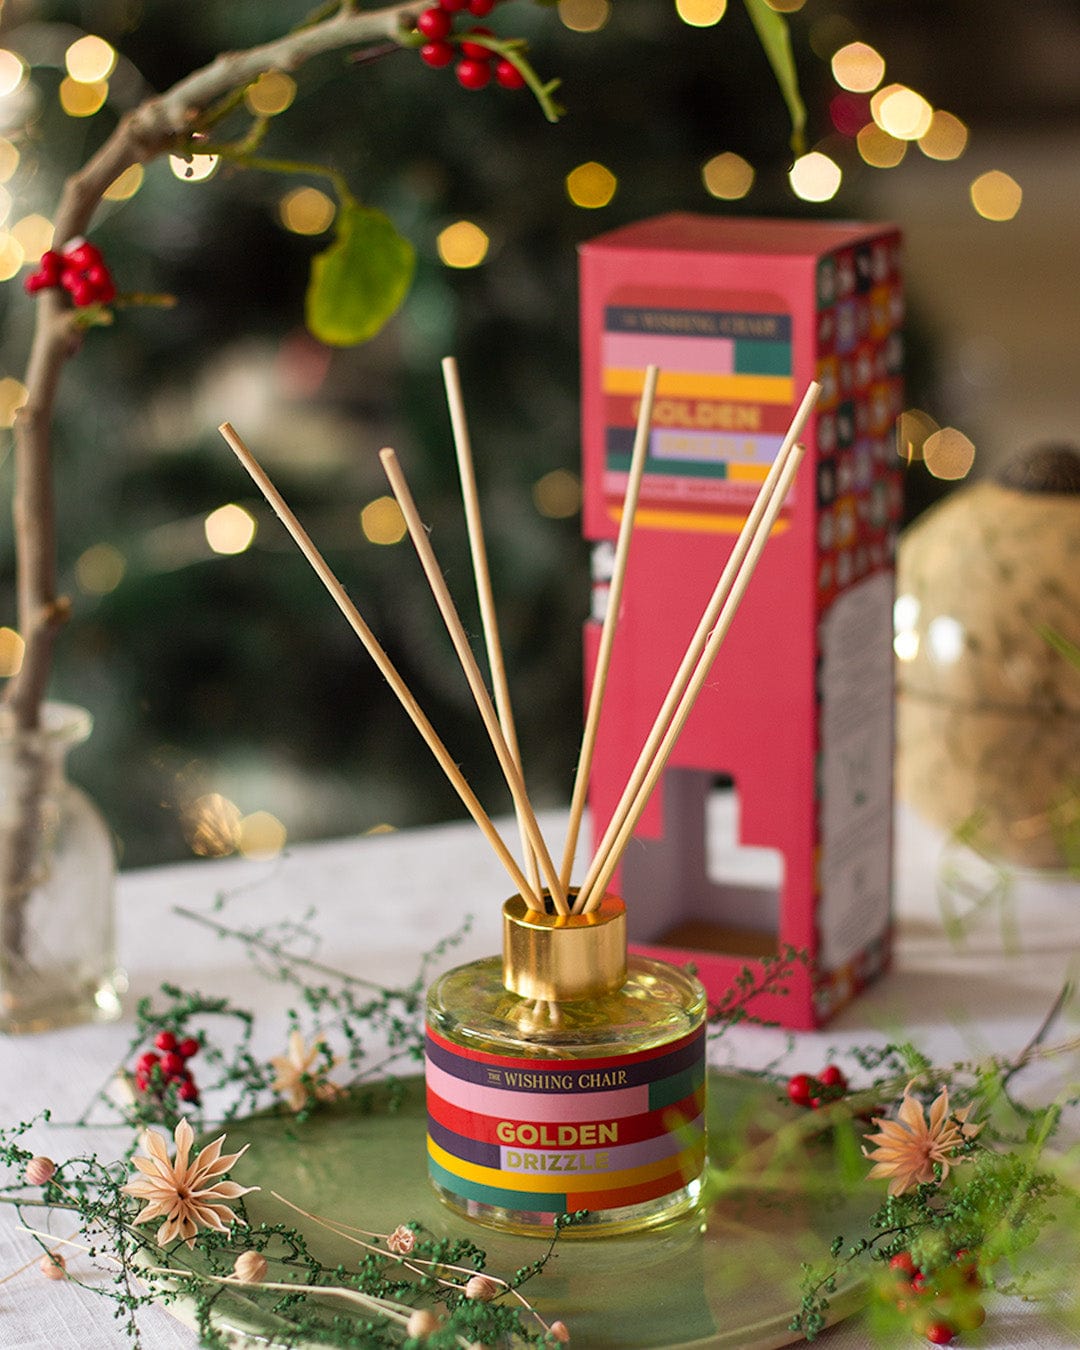 Golden Drizzle Reed Diffuser